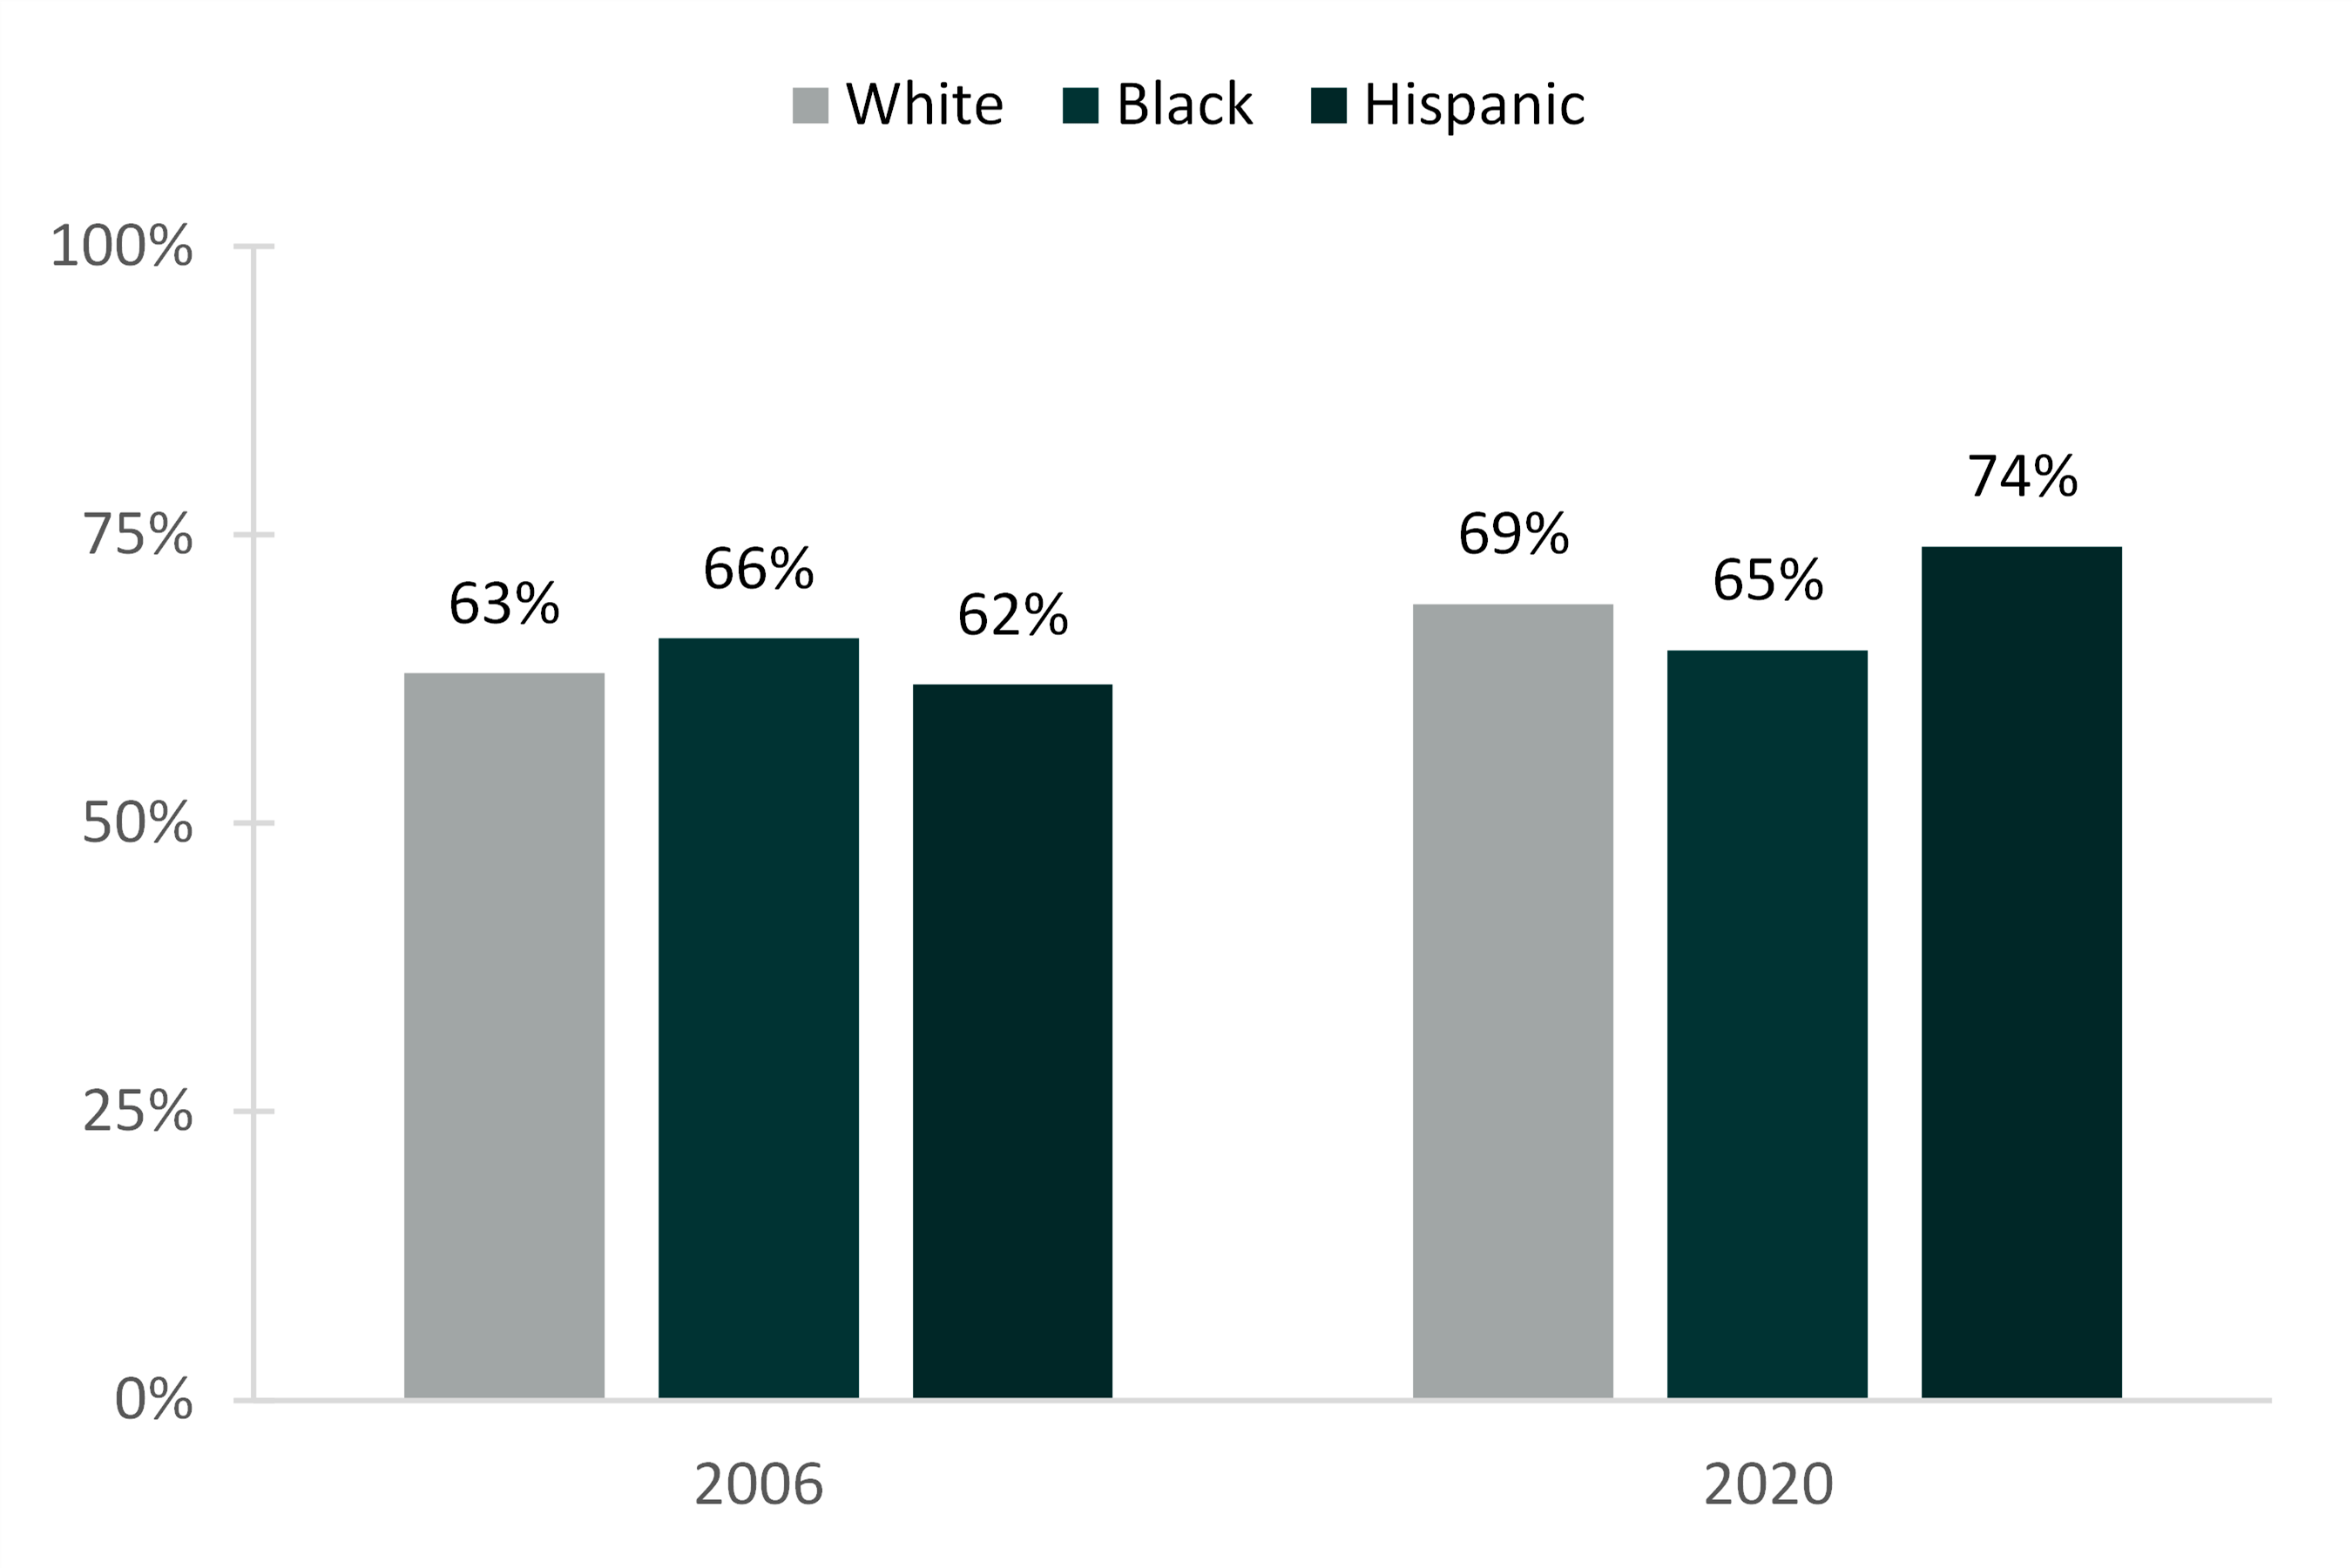 graph showing Figure 4. High School Seniors’ Agreement with Cohabitation as a Testing Ground for Marriage by Race/Ethnicity, 2006 and 2020*